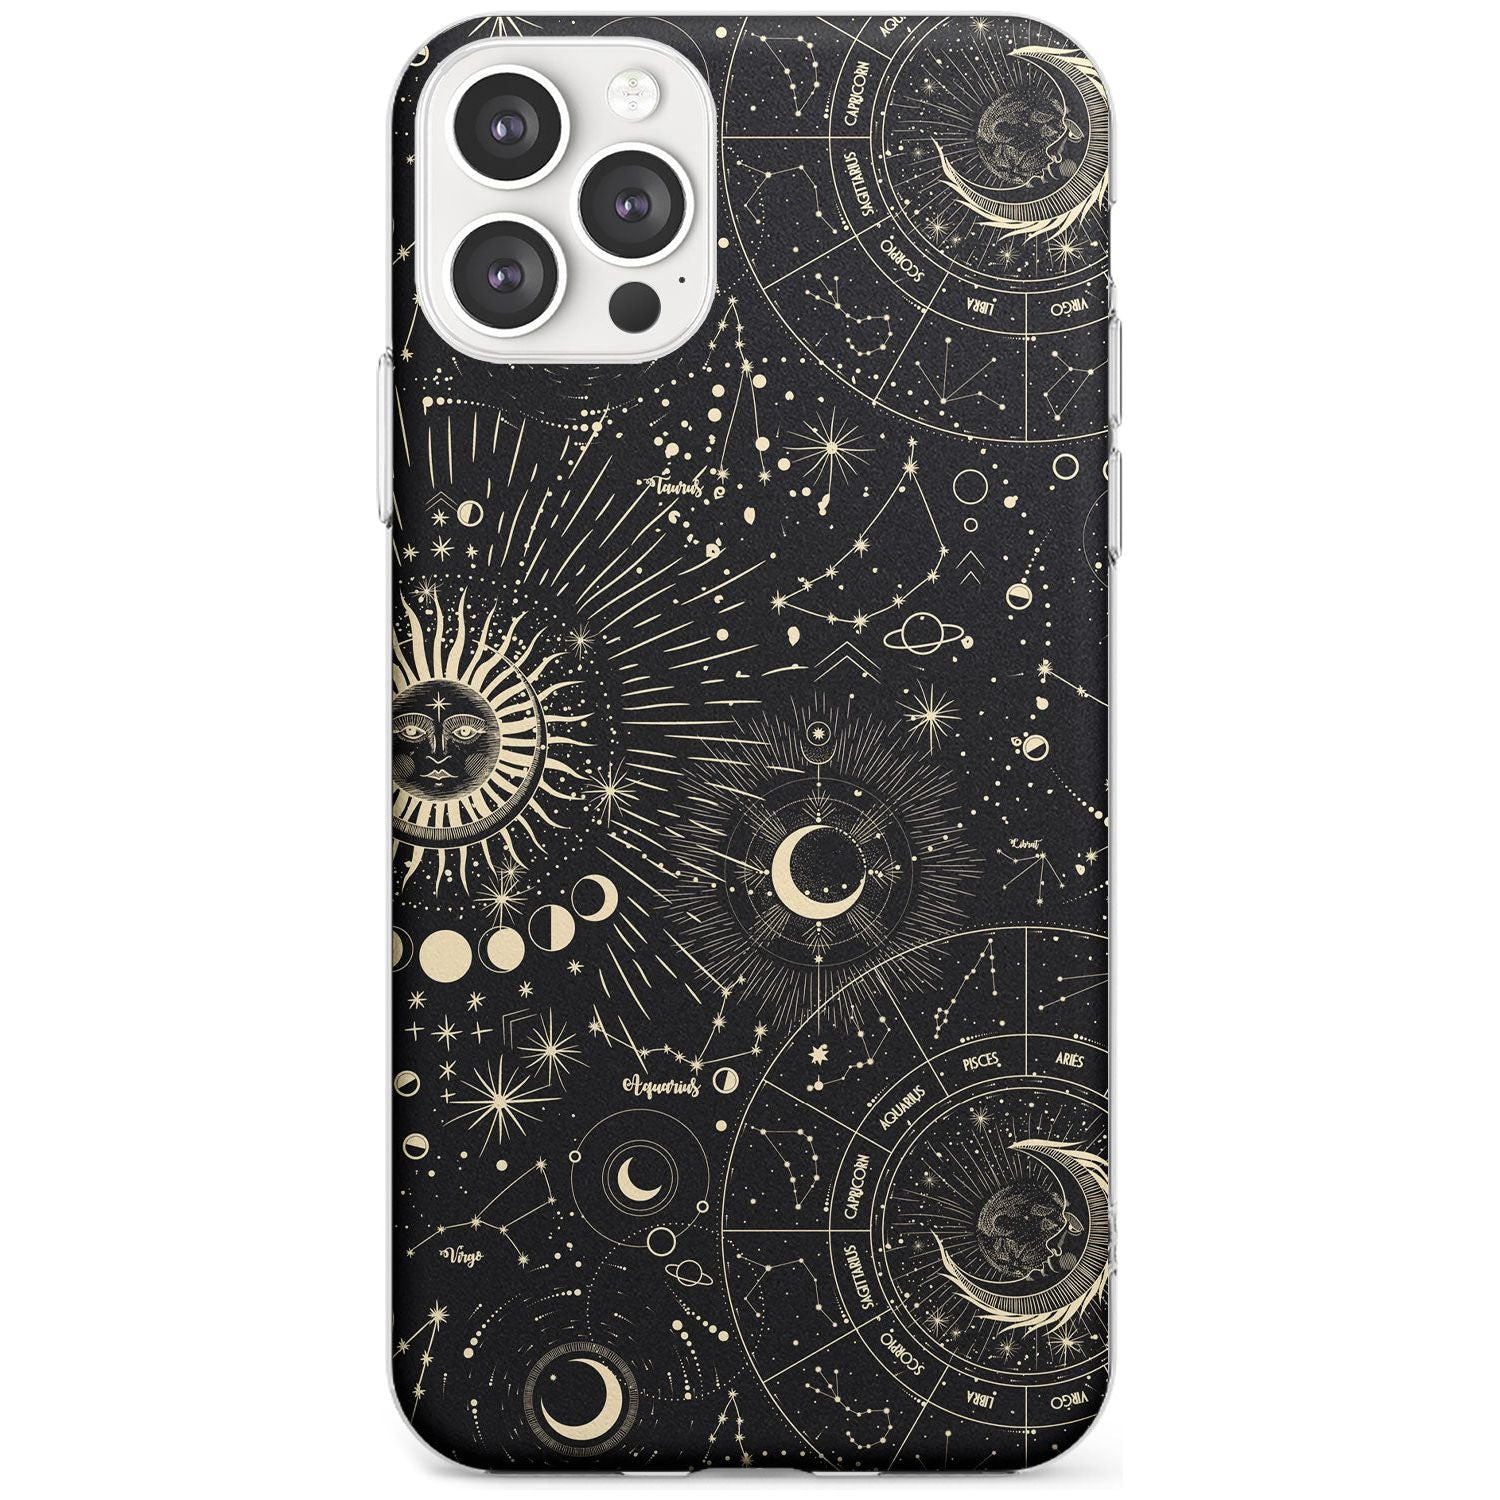 Suns & Zodiac Charts Black Impact Phone Case for iPhone 11 Pro Max